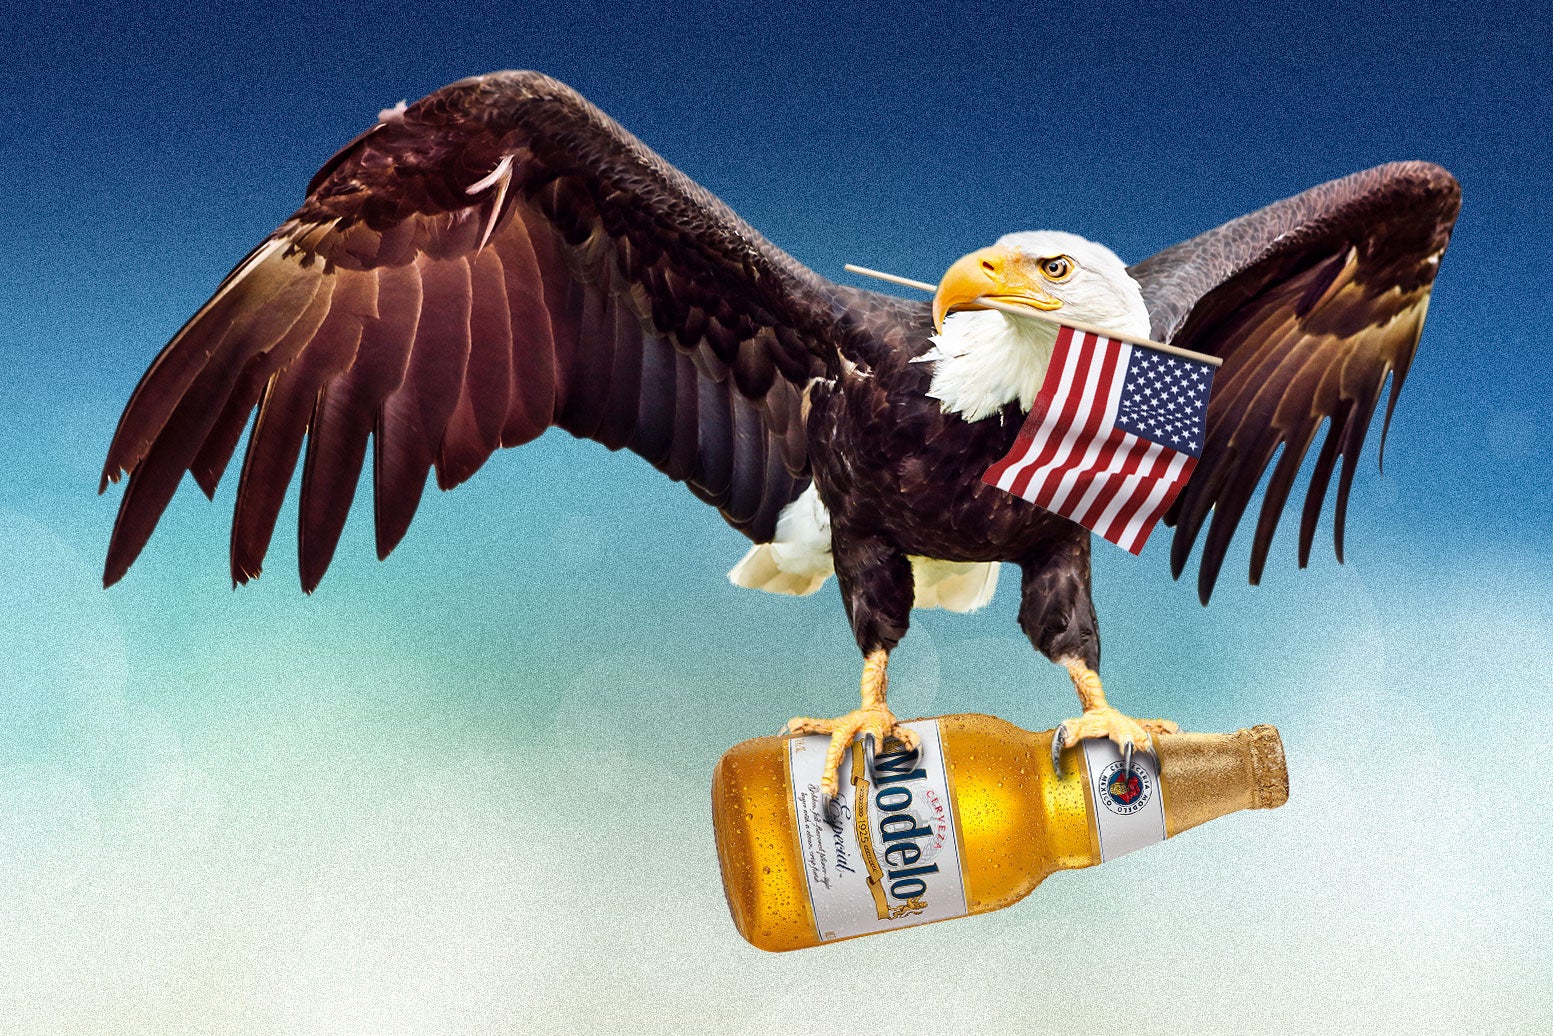 A bald eagle holds an American flag in its beak and a Modelo beer in its talons.